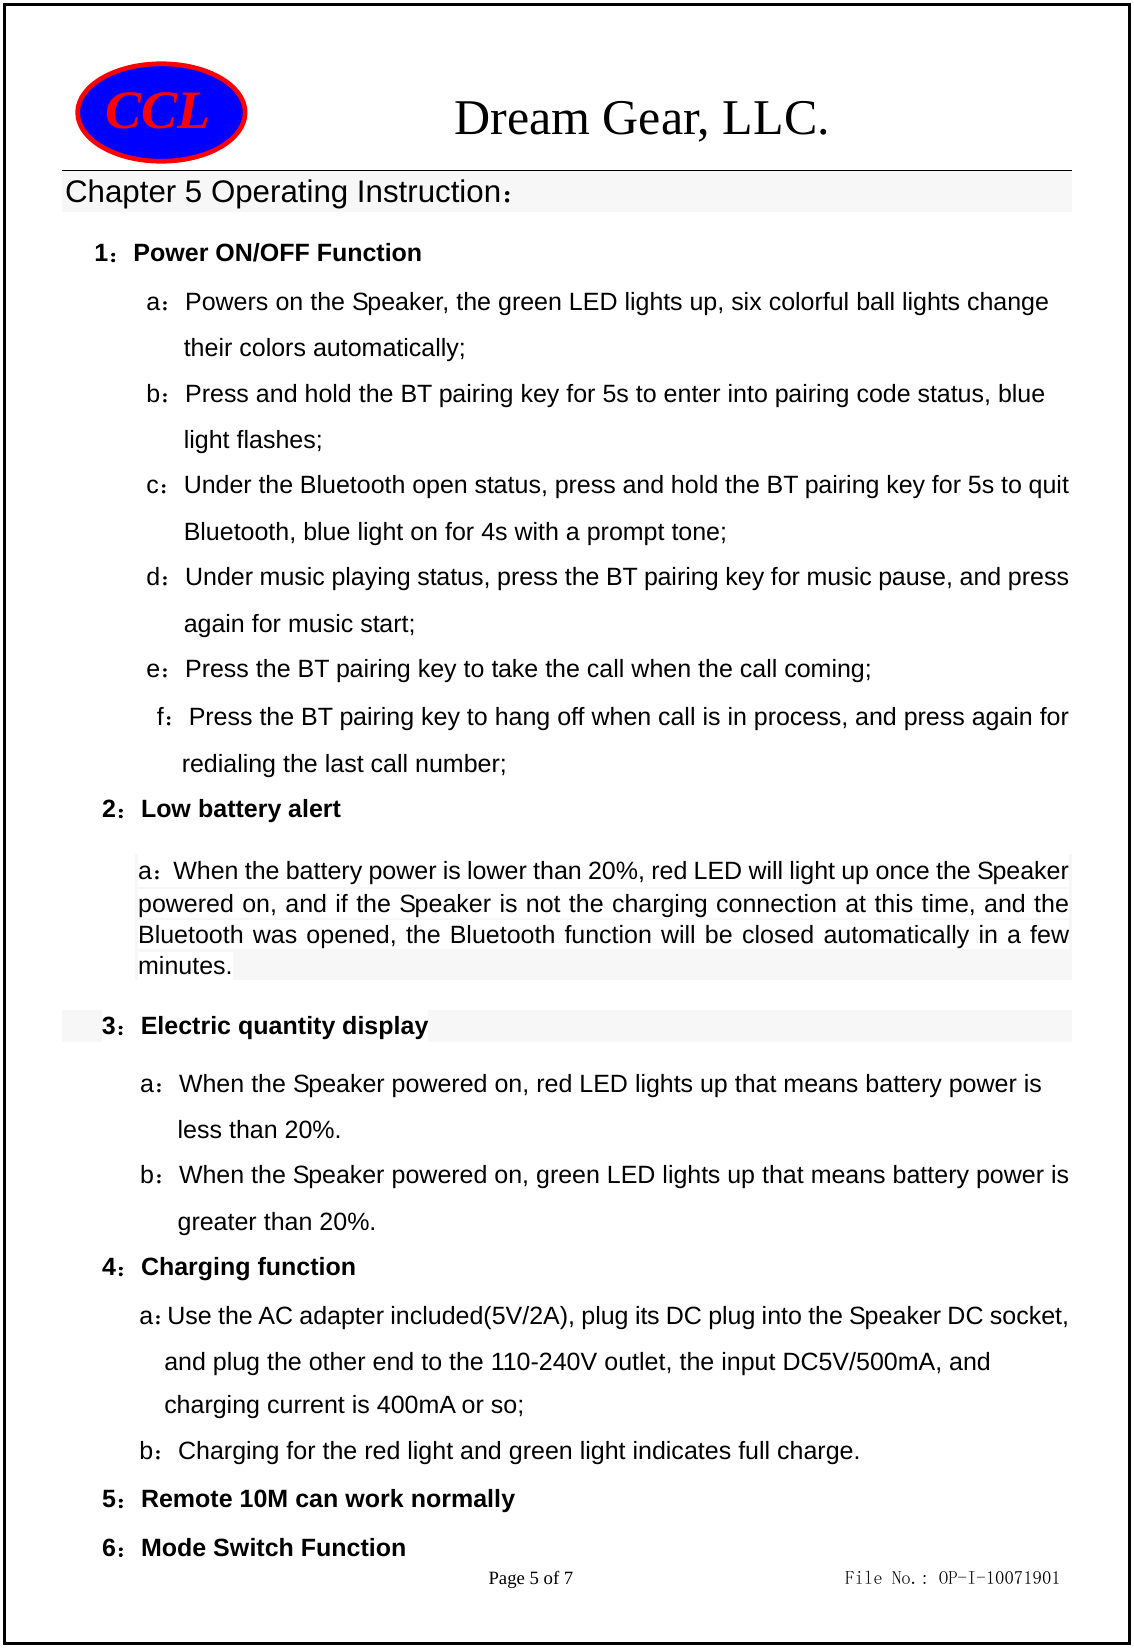                 Dream Gear, LLC.                                        Page 5 of 7                             File No.: OP-I-10071901 CCL Chapter 5 Operating Instruction：  1：Power ON/OFF Function a：Powers on the Speaker, the green LED lights up, six colorful ball lights change their colors automatically; b：Press and hold the BT pairing key for 5s to enter into pairing code status, blue light flashes; c：Under the Bluetooth open status, press and hold the BT pairing key for 5s to quit Bluetooth, blue light on for 4s with a prompt tone; d：Under music playing status, press the BT pairing key for music pause, and press again for music start; e：Press the BT pairing key to take the call when the call coming; f：Press the BT pairing key to hang off when call is in process, and press again for redialing the last call number; 2：Low battery alert a：When the battery power is lower than 20%, red LED will light up once the Speaker powered on, and if the Speaker is not the charging connection at this time, and the Bluetooth was opened, the Bluetooth function will be closed automatically in a few minutes. 3：Electric quantity display a：When the Speaker powered on, red LED lights up that means battery power is   less than 20%. b：When the Speaker powered on, green LED lights up that means battery power is   greater than 20%. 4：Charging function a：Use the AC adapter included(5V/2A), plug its DC plug into the Speaker DC socket, and plug the other end to the 110-240V outlet, the input DC5V/500mA, and charging current is 400mA or so; b：Charging for the red light and green light indicates full charge. 5：Remote 10M can work normally 6：Mode Switch Function 